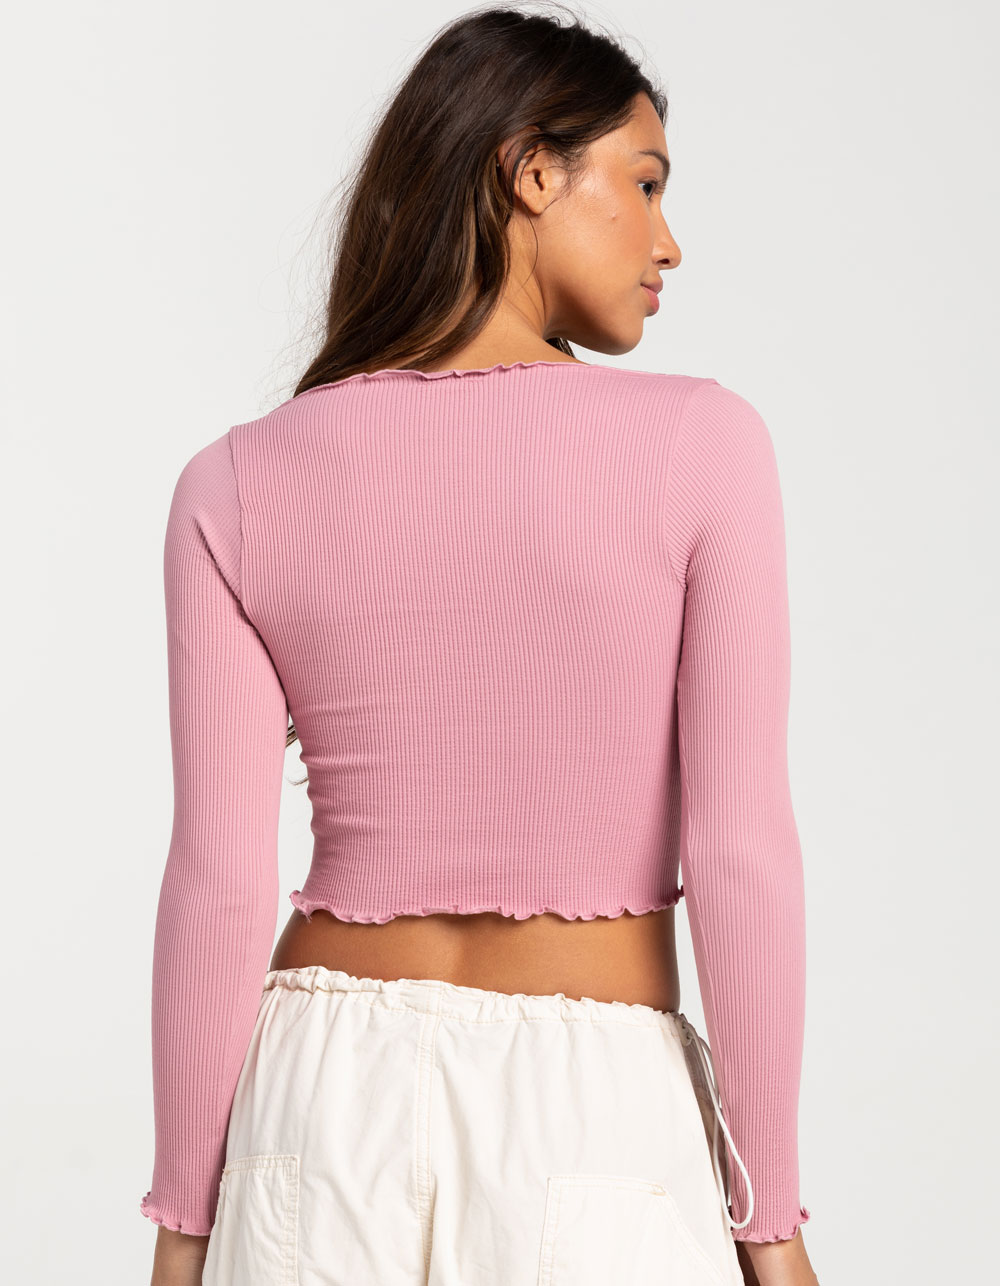 BDG Urban Outfitters Seamless Elise Womens Long Sleeve Top - PINK